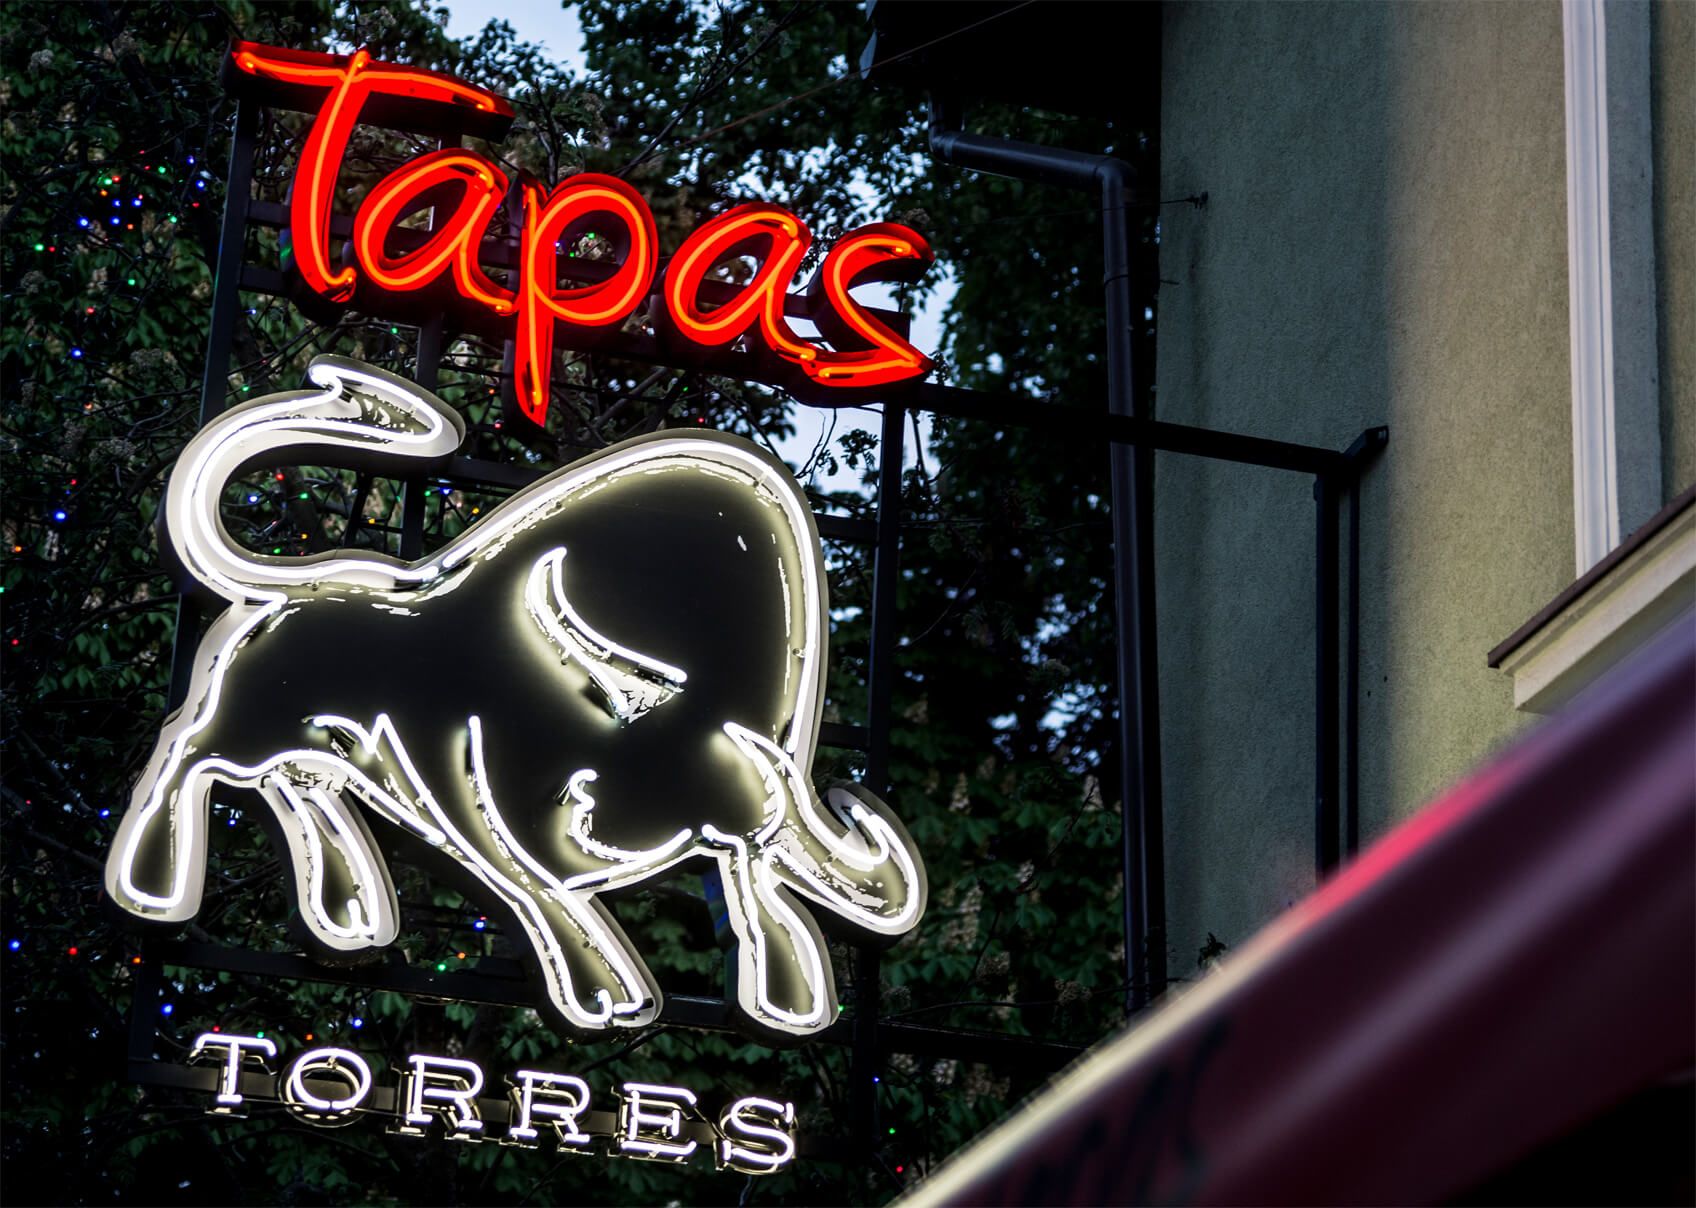 Tapas torres - neon-tapas-torres-byk-neon-above-entry-to-the-restaurant-neon-lumineux-neon-spatial-neon-at-height-neon-on-a-pillar-logo-neon-sopot-spainese-restaurant